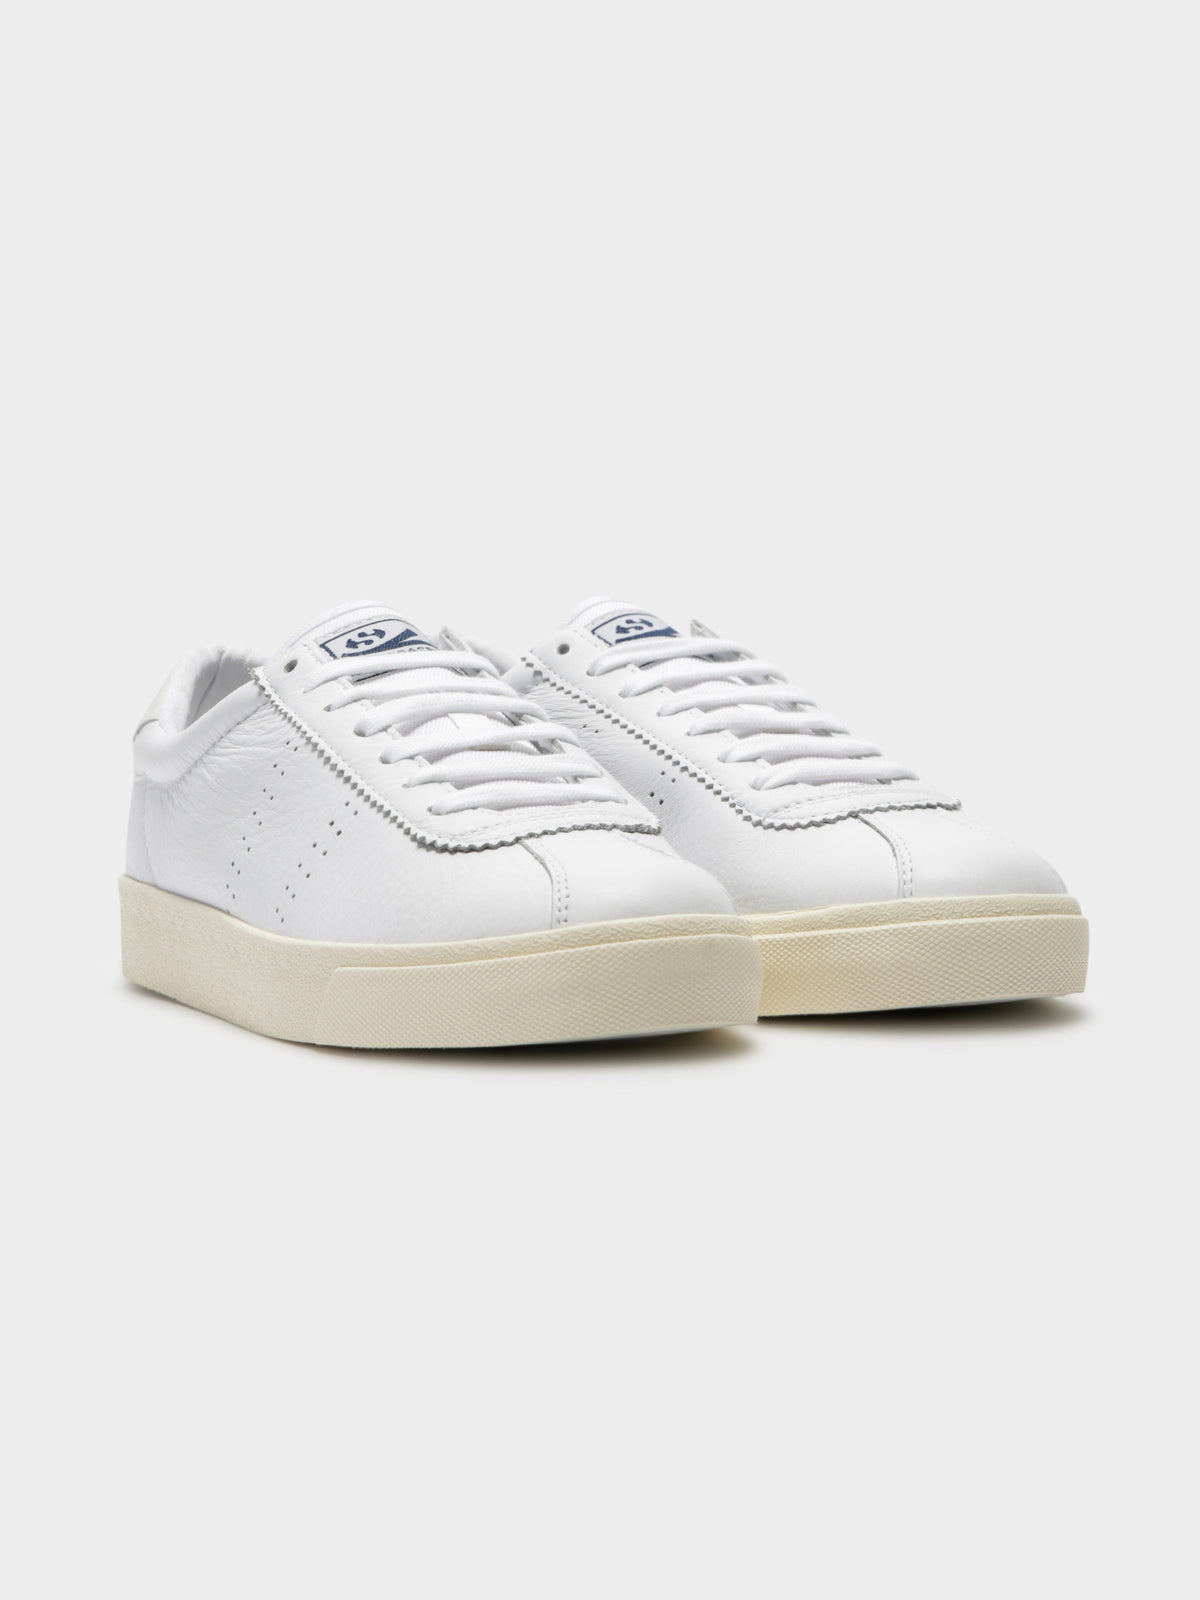 Unisex 2843 Comfort Leather Sneakers in White